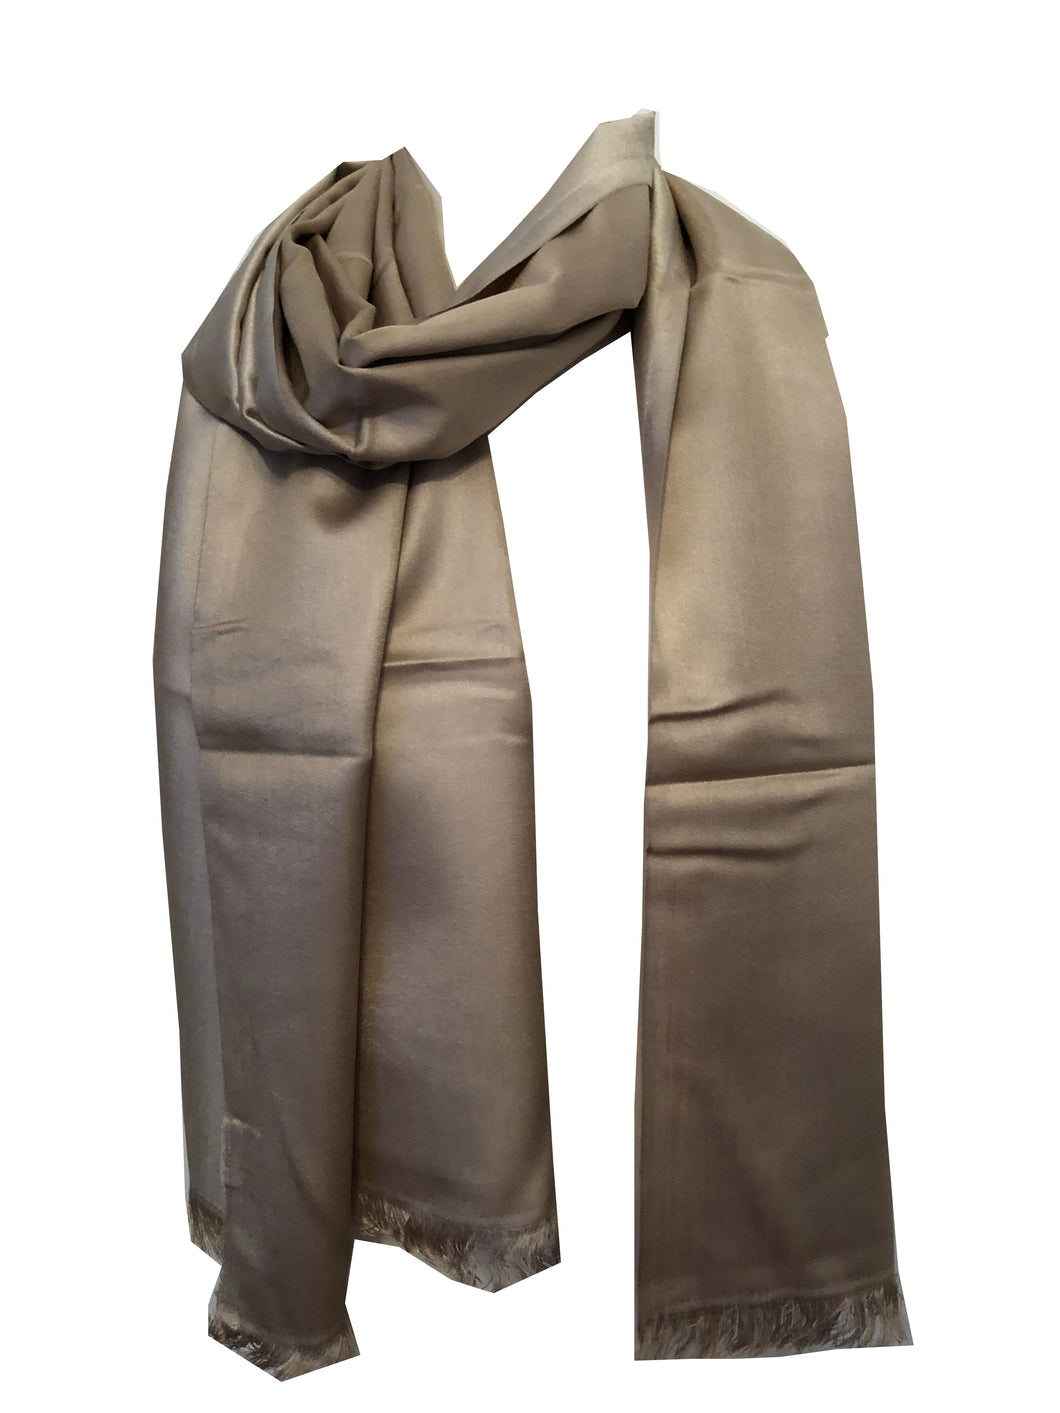 Dark and Light Beige Reversible 100% Silk Scarf/wrap with Slightly Frayed Edge Lovely Long Scarf